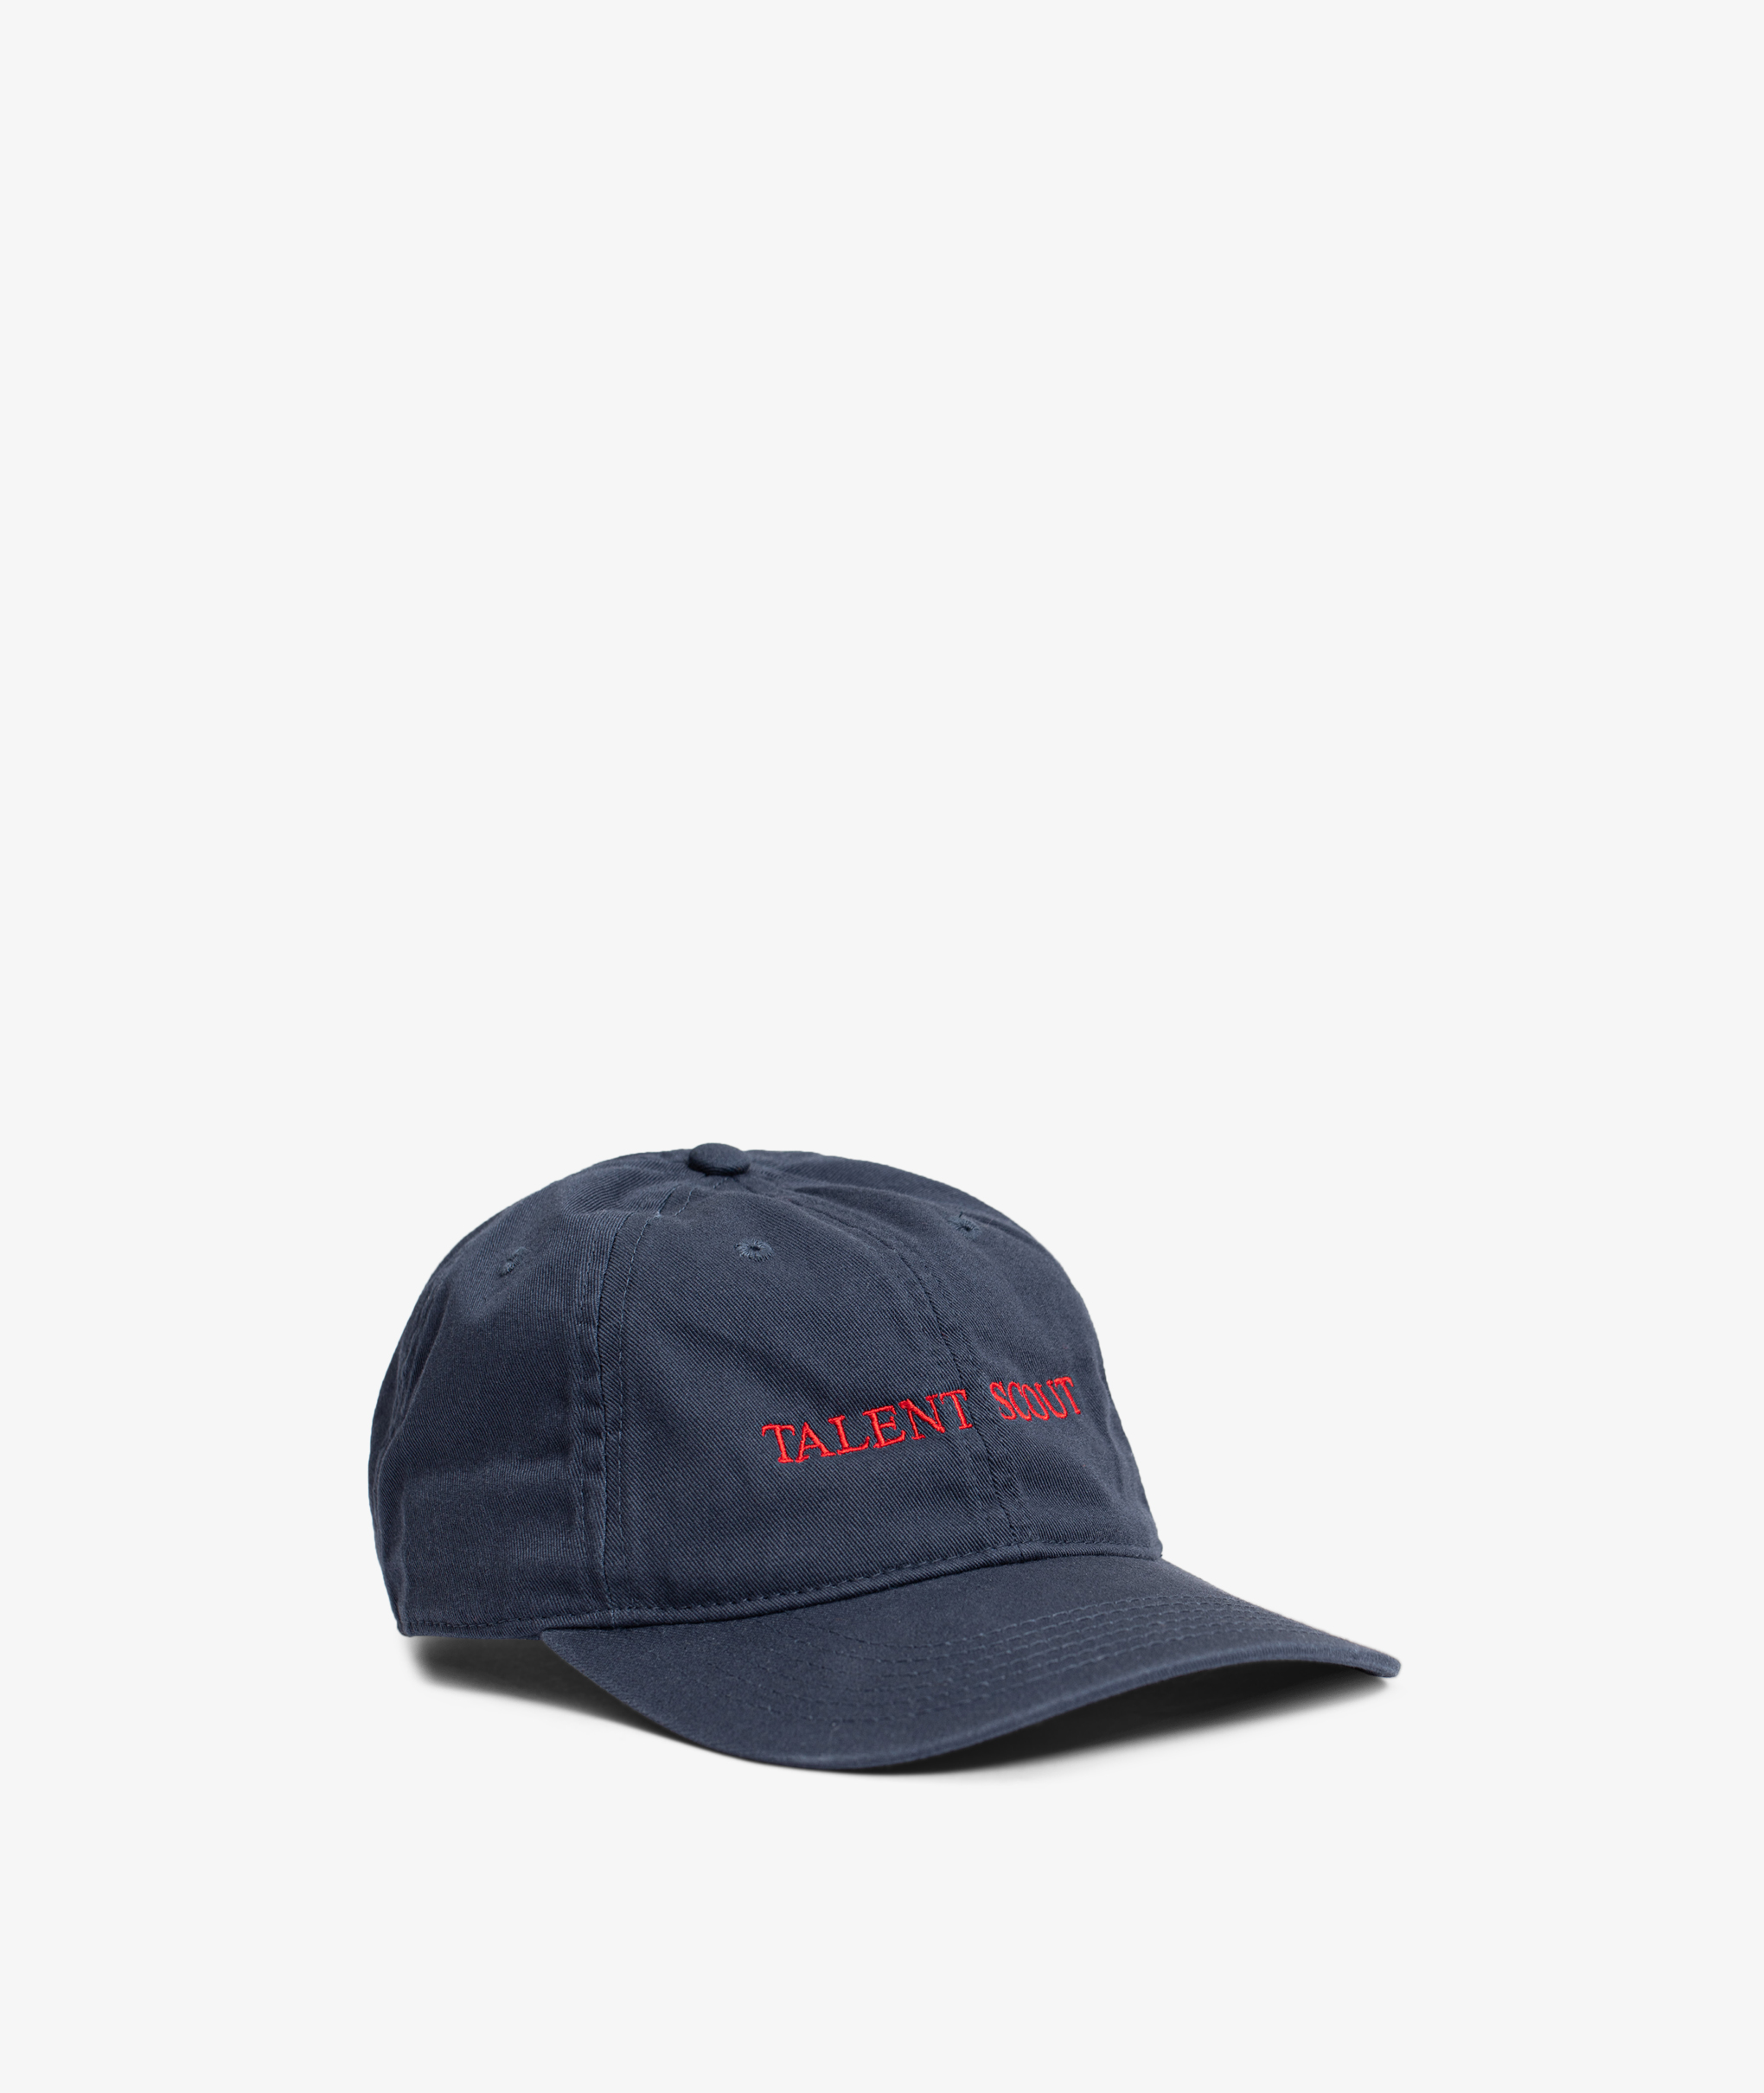 Norse Store | Shipping Worldwide - IDEA Talent Scout Cap - Navy